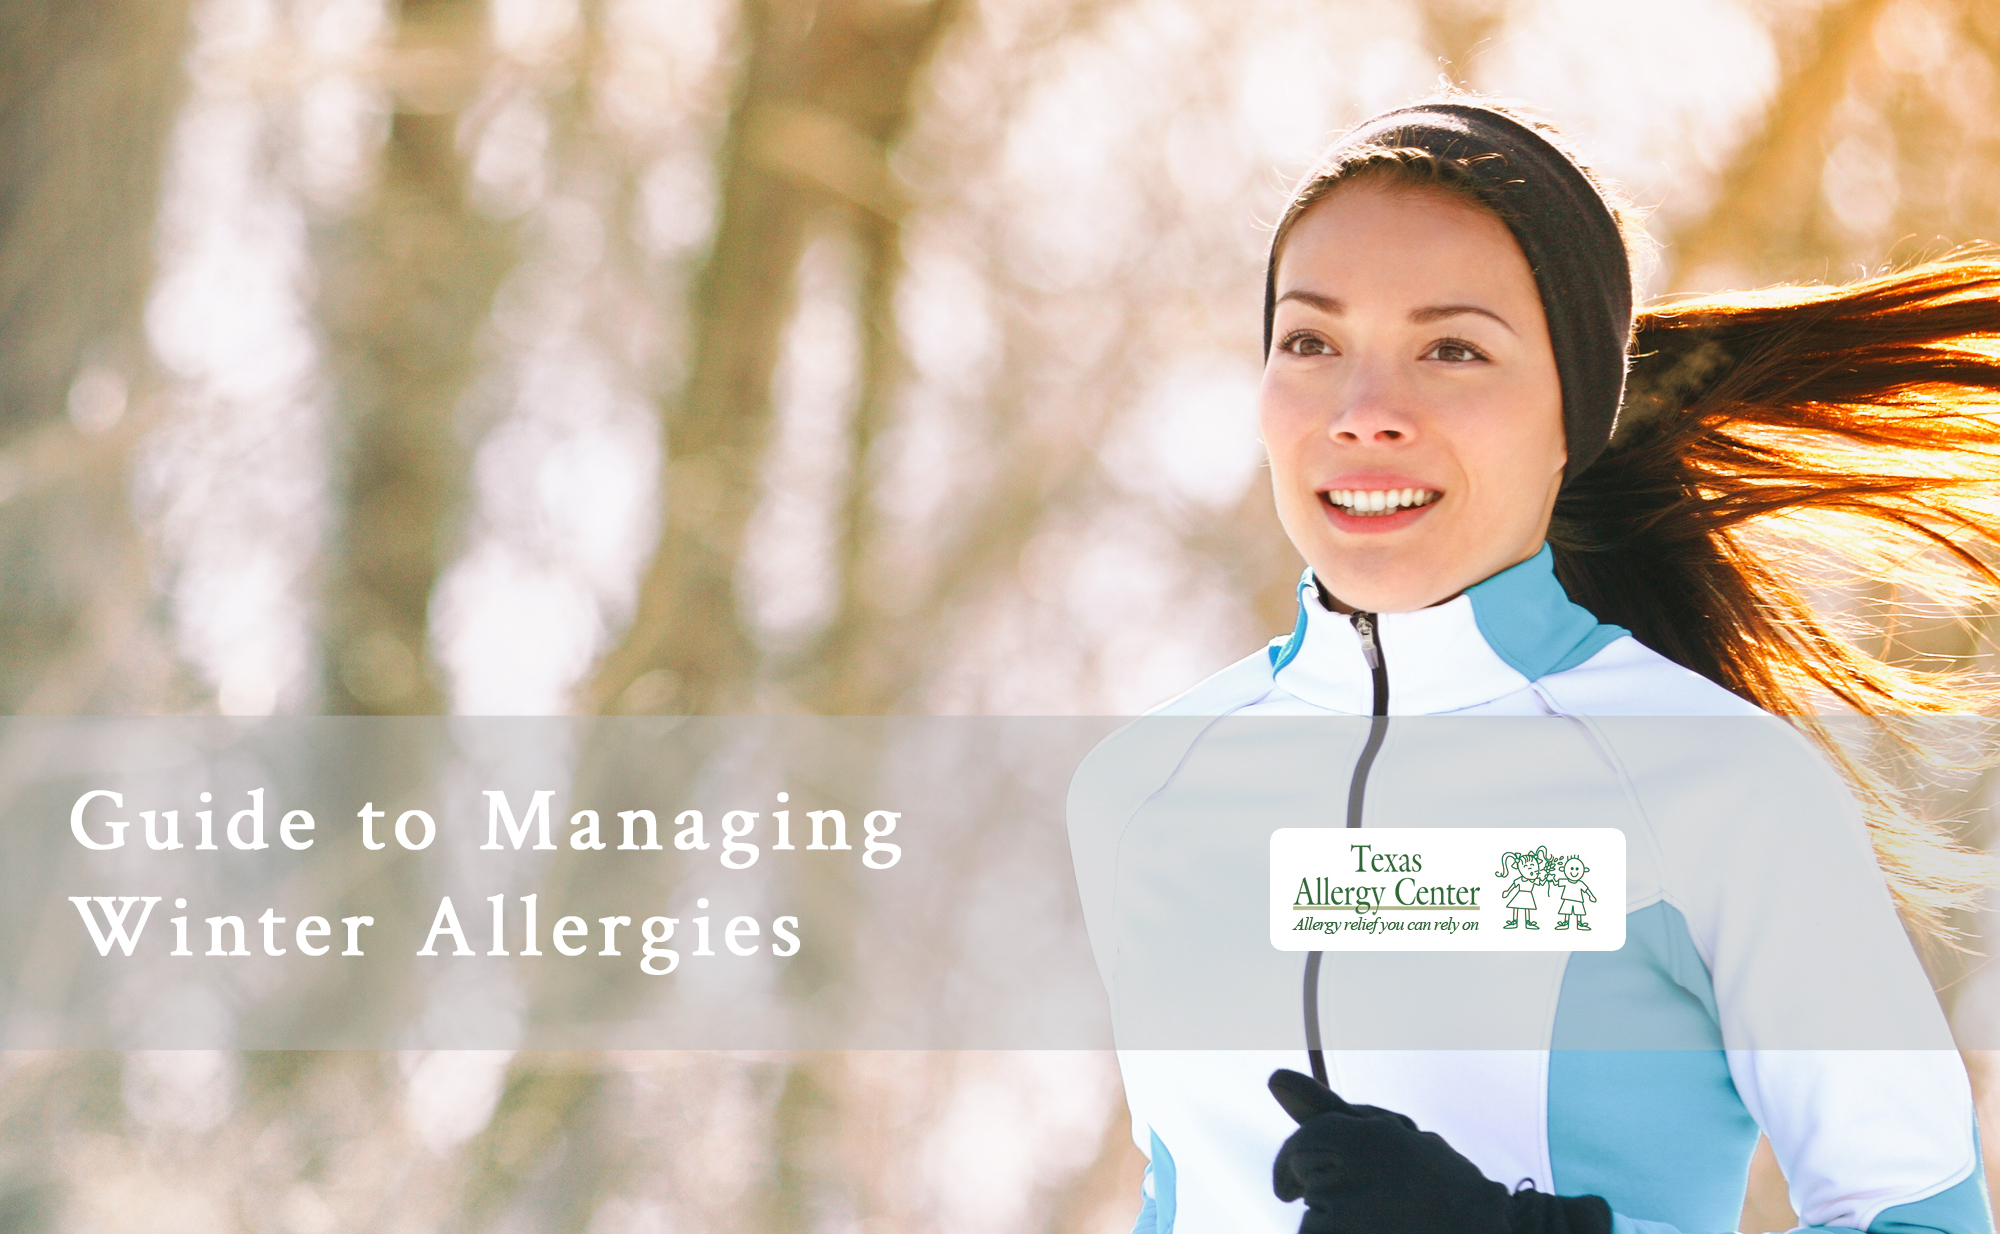 Texas Allergy And Asthma Care Guide to Managing Winter Allergies